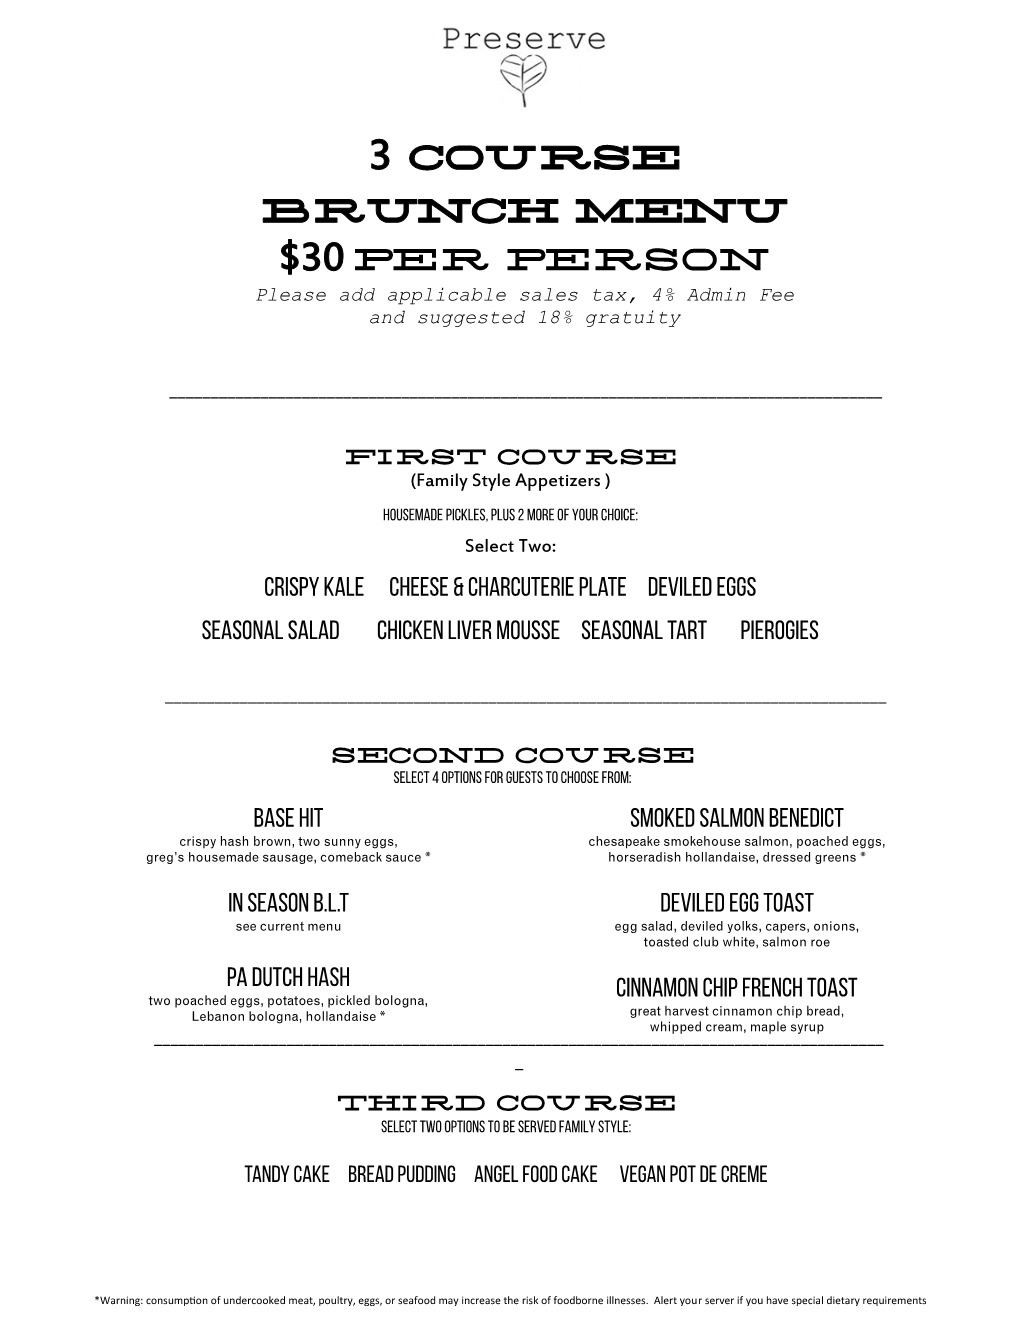 3 Course Brunch Menu $30 Per Person Please Add Applicable Sales Tax, 4% Admin Fee and Suggested 18% Gratuity